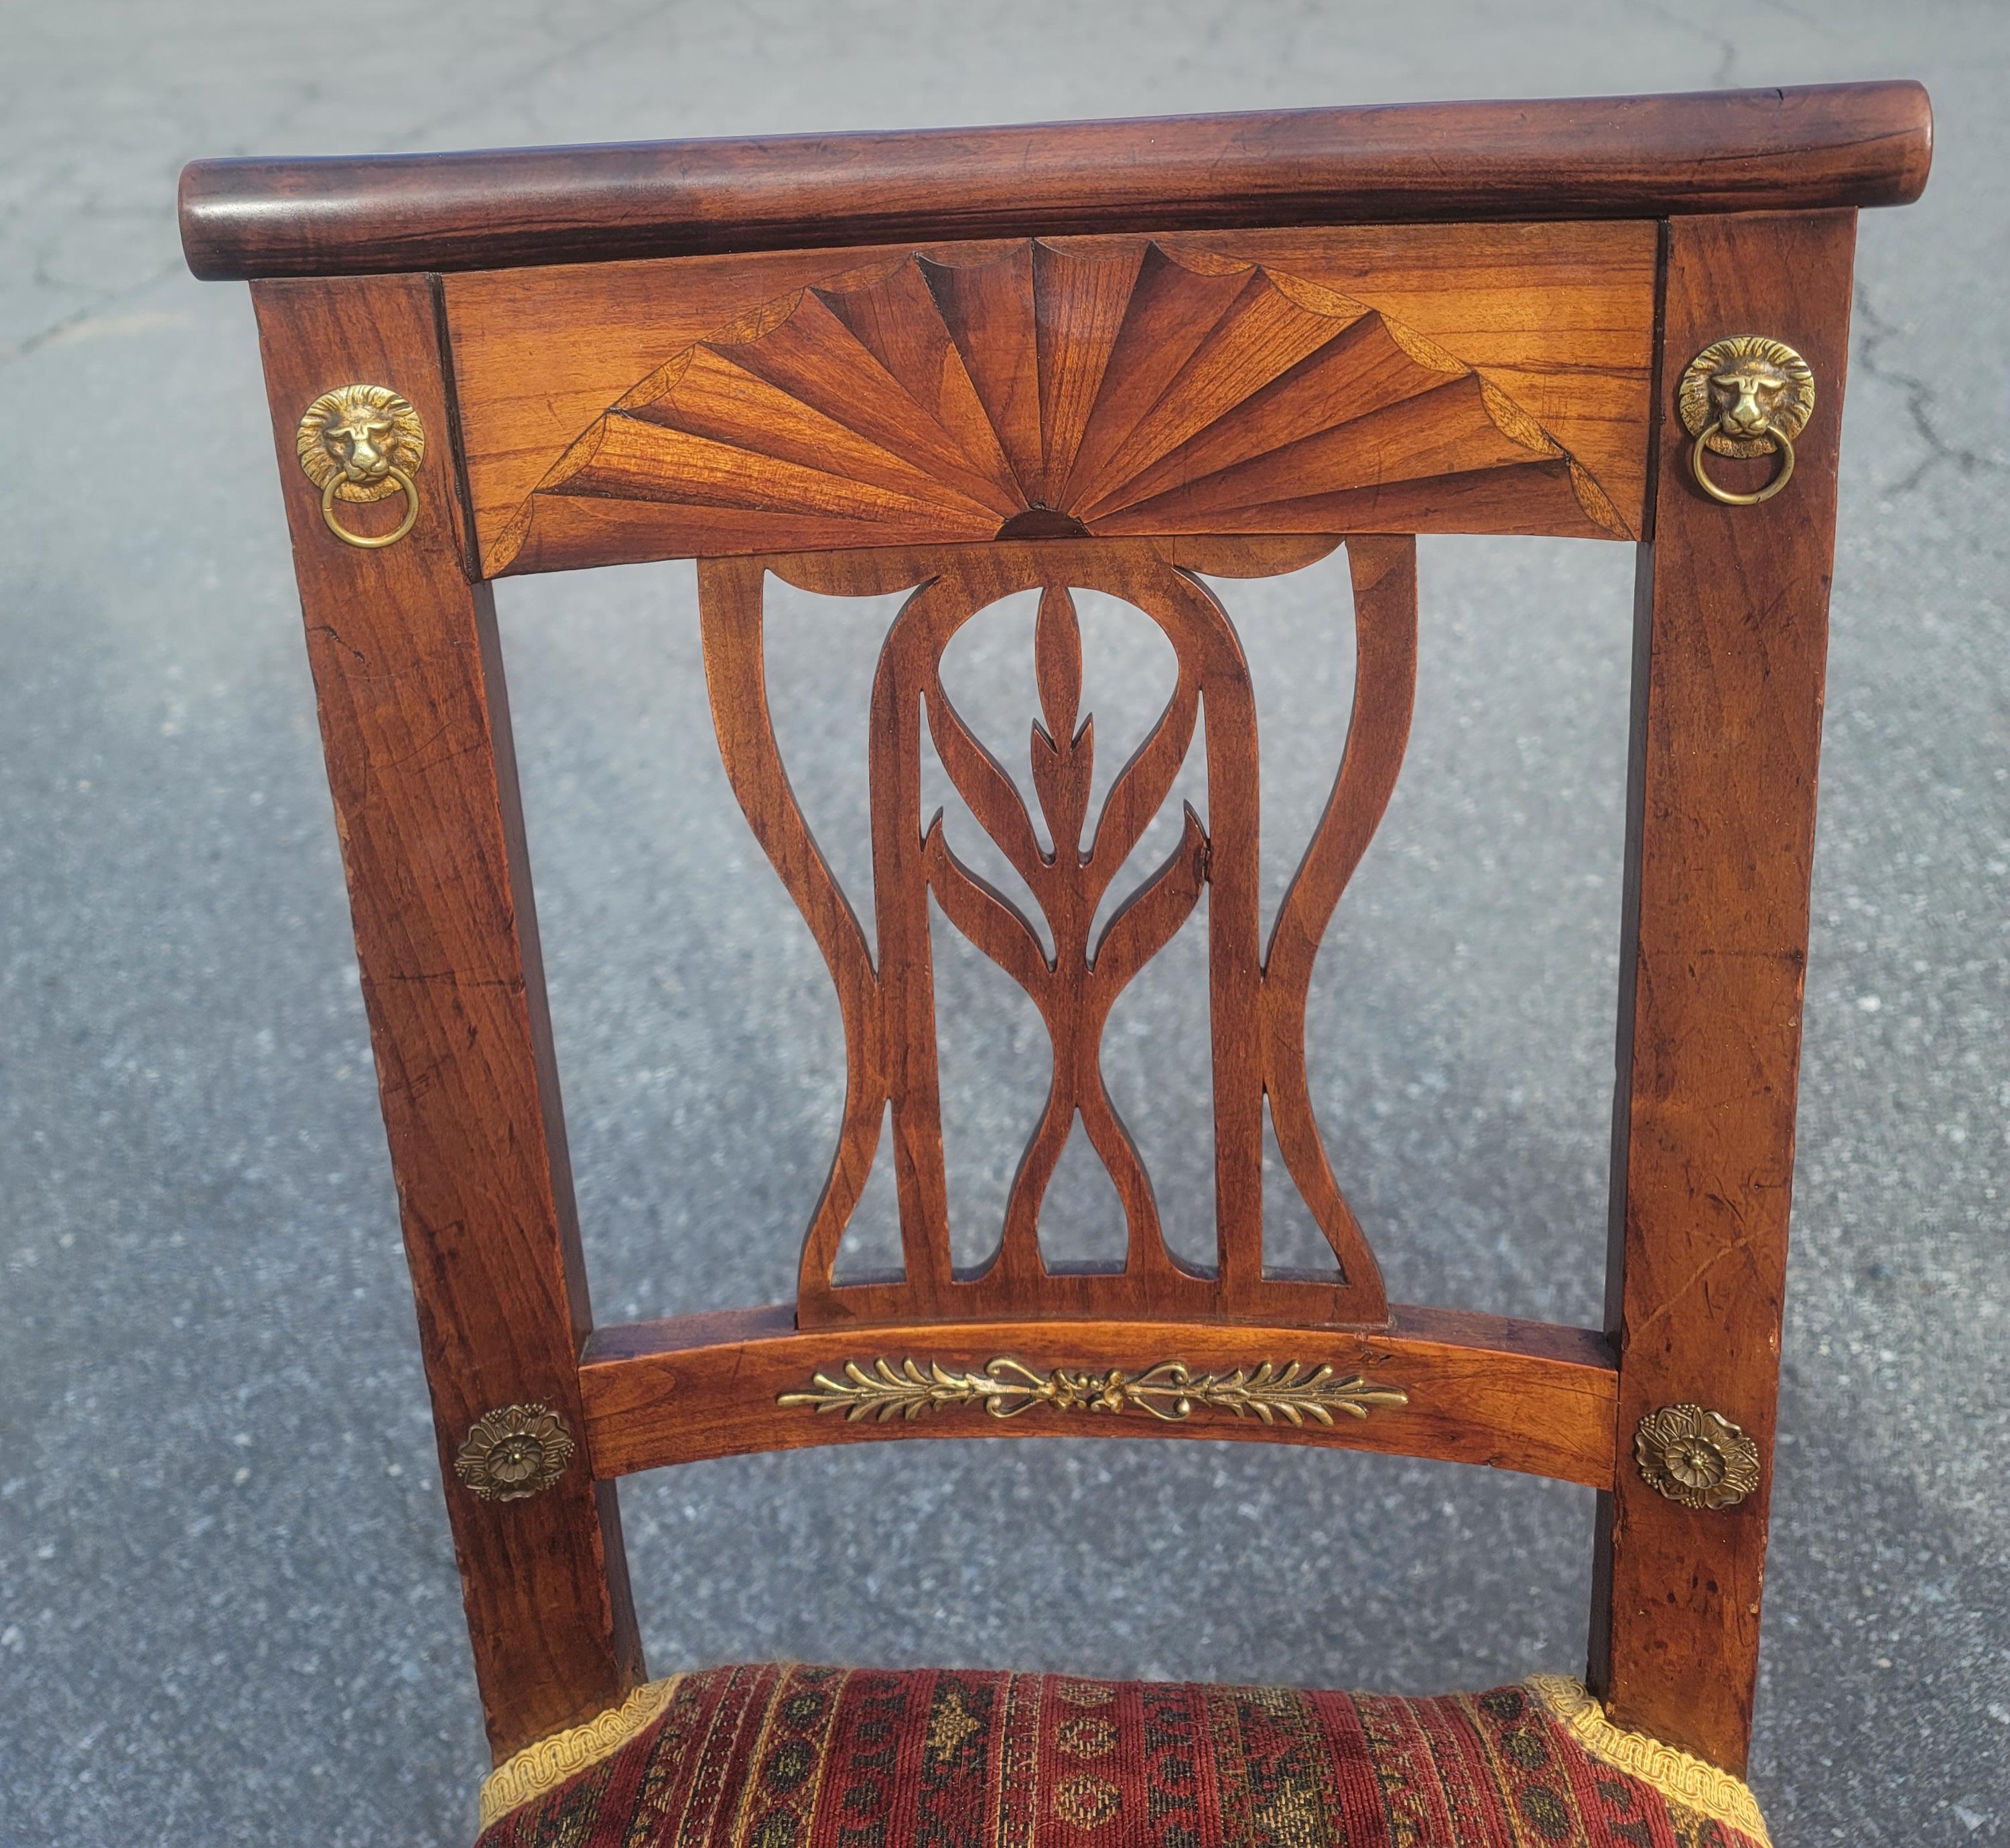 19th C. Swedish Continental Brass Mounted & Parquetry Inlaid Cherry Chairs, Pair For Sale 1